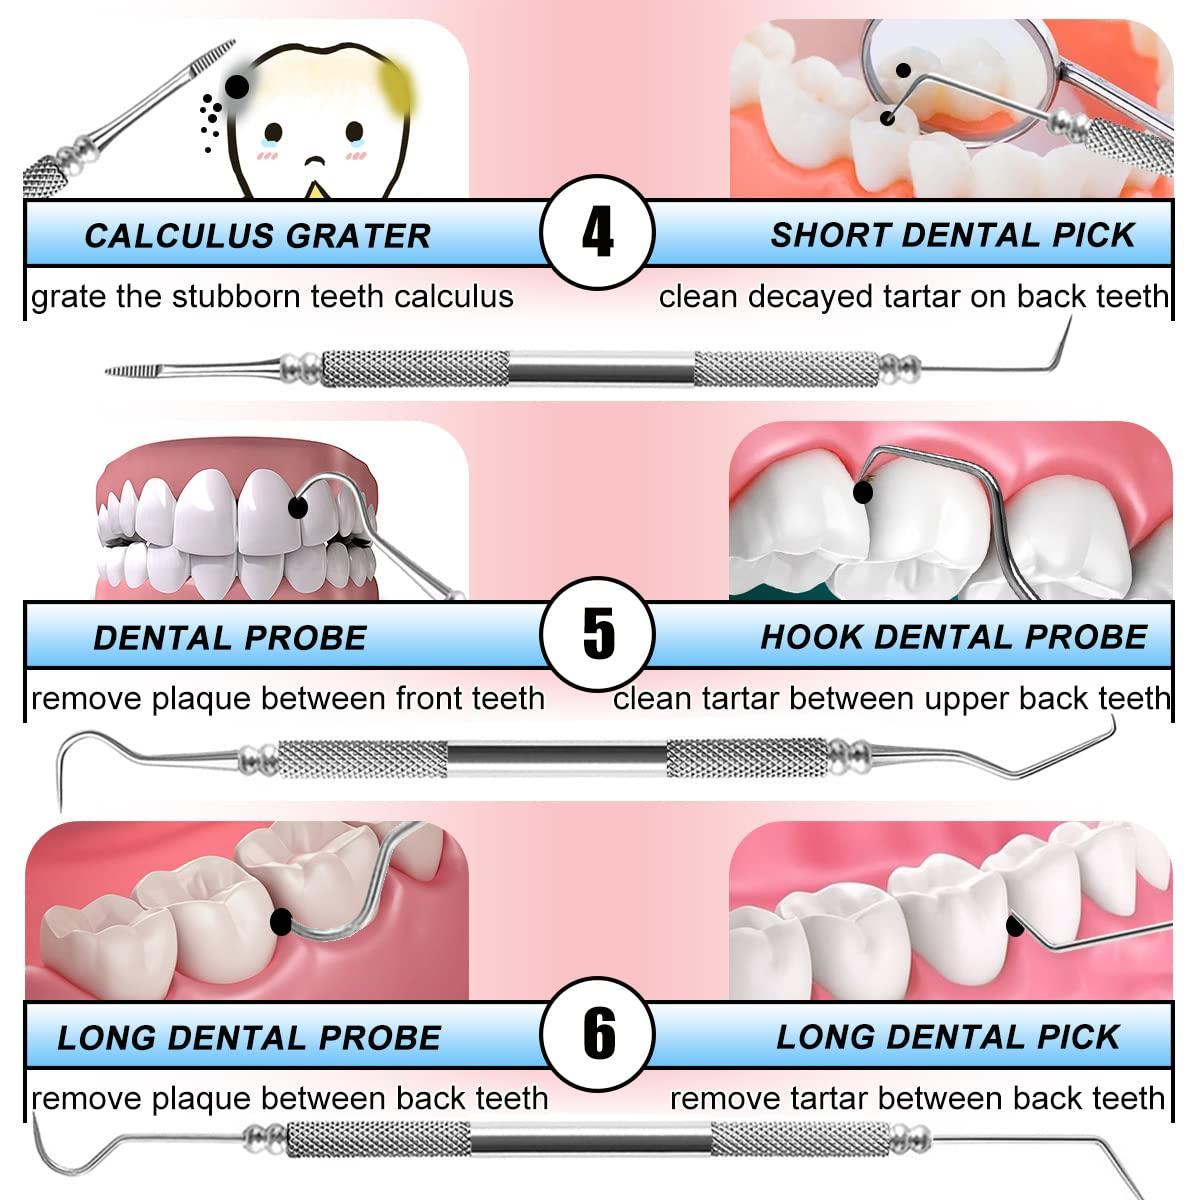 5 Common Dental Tools for Cleaning